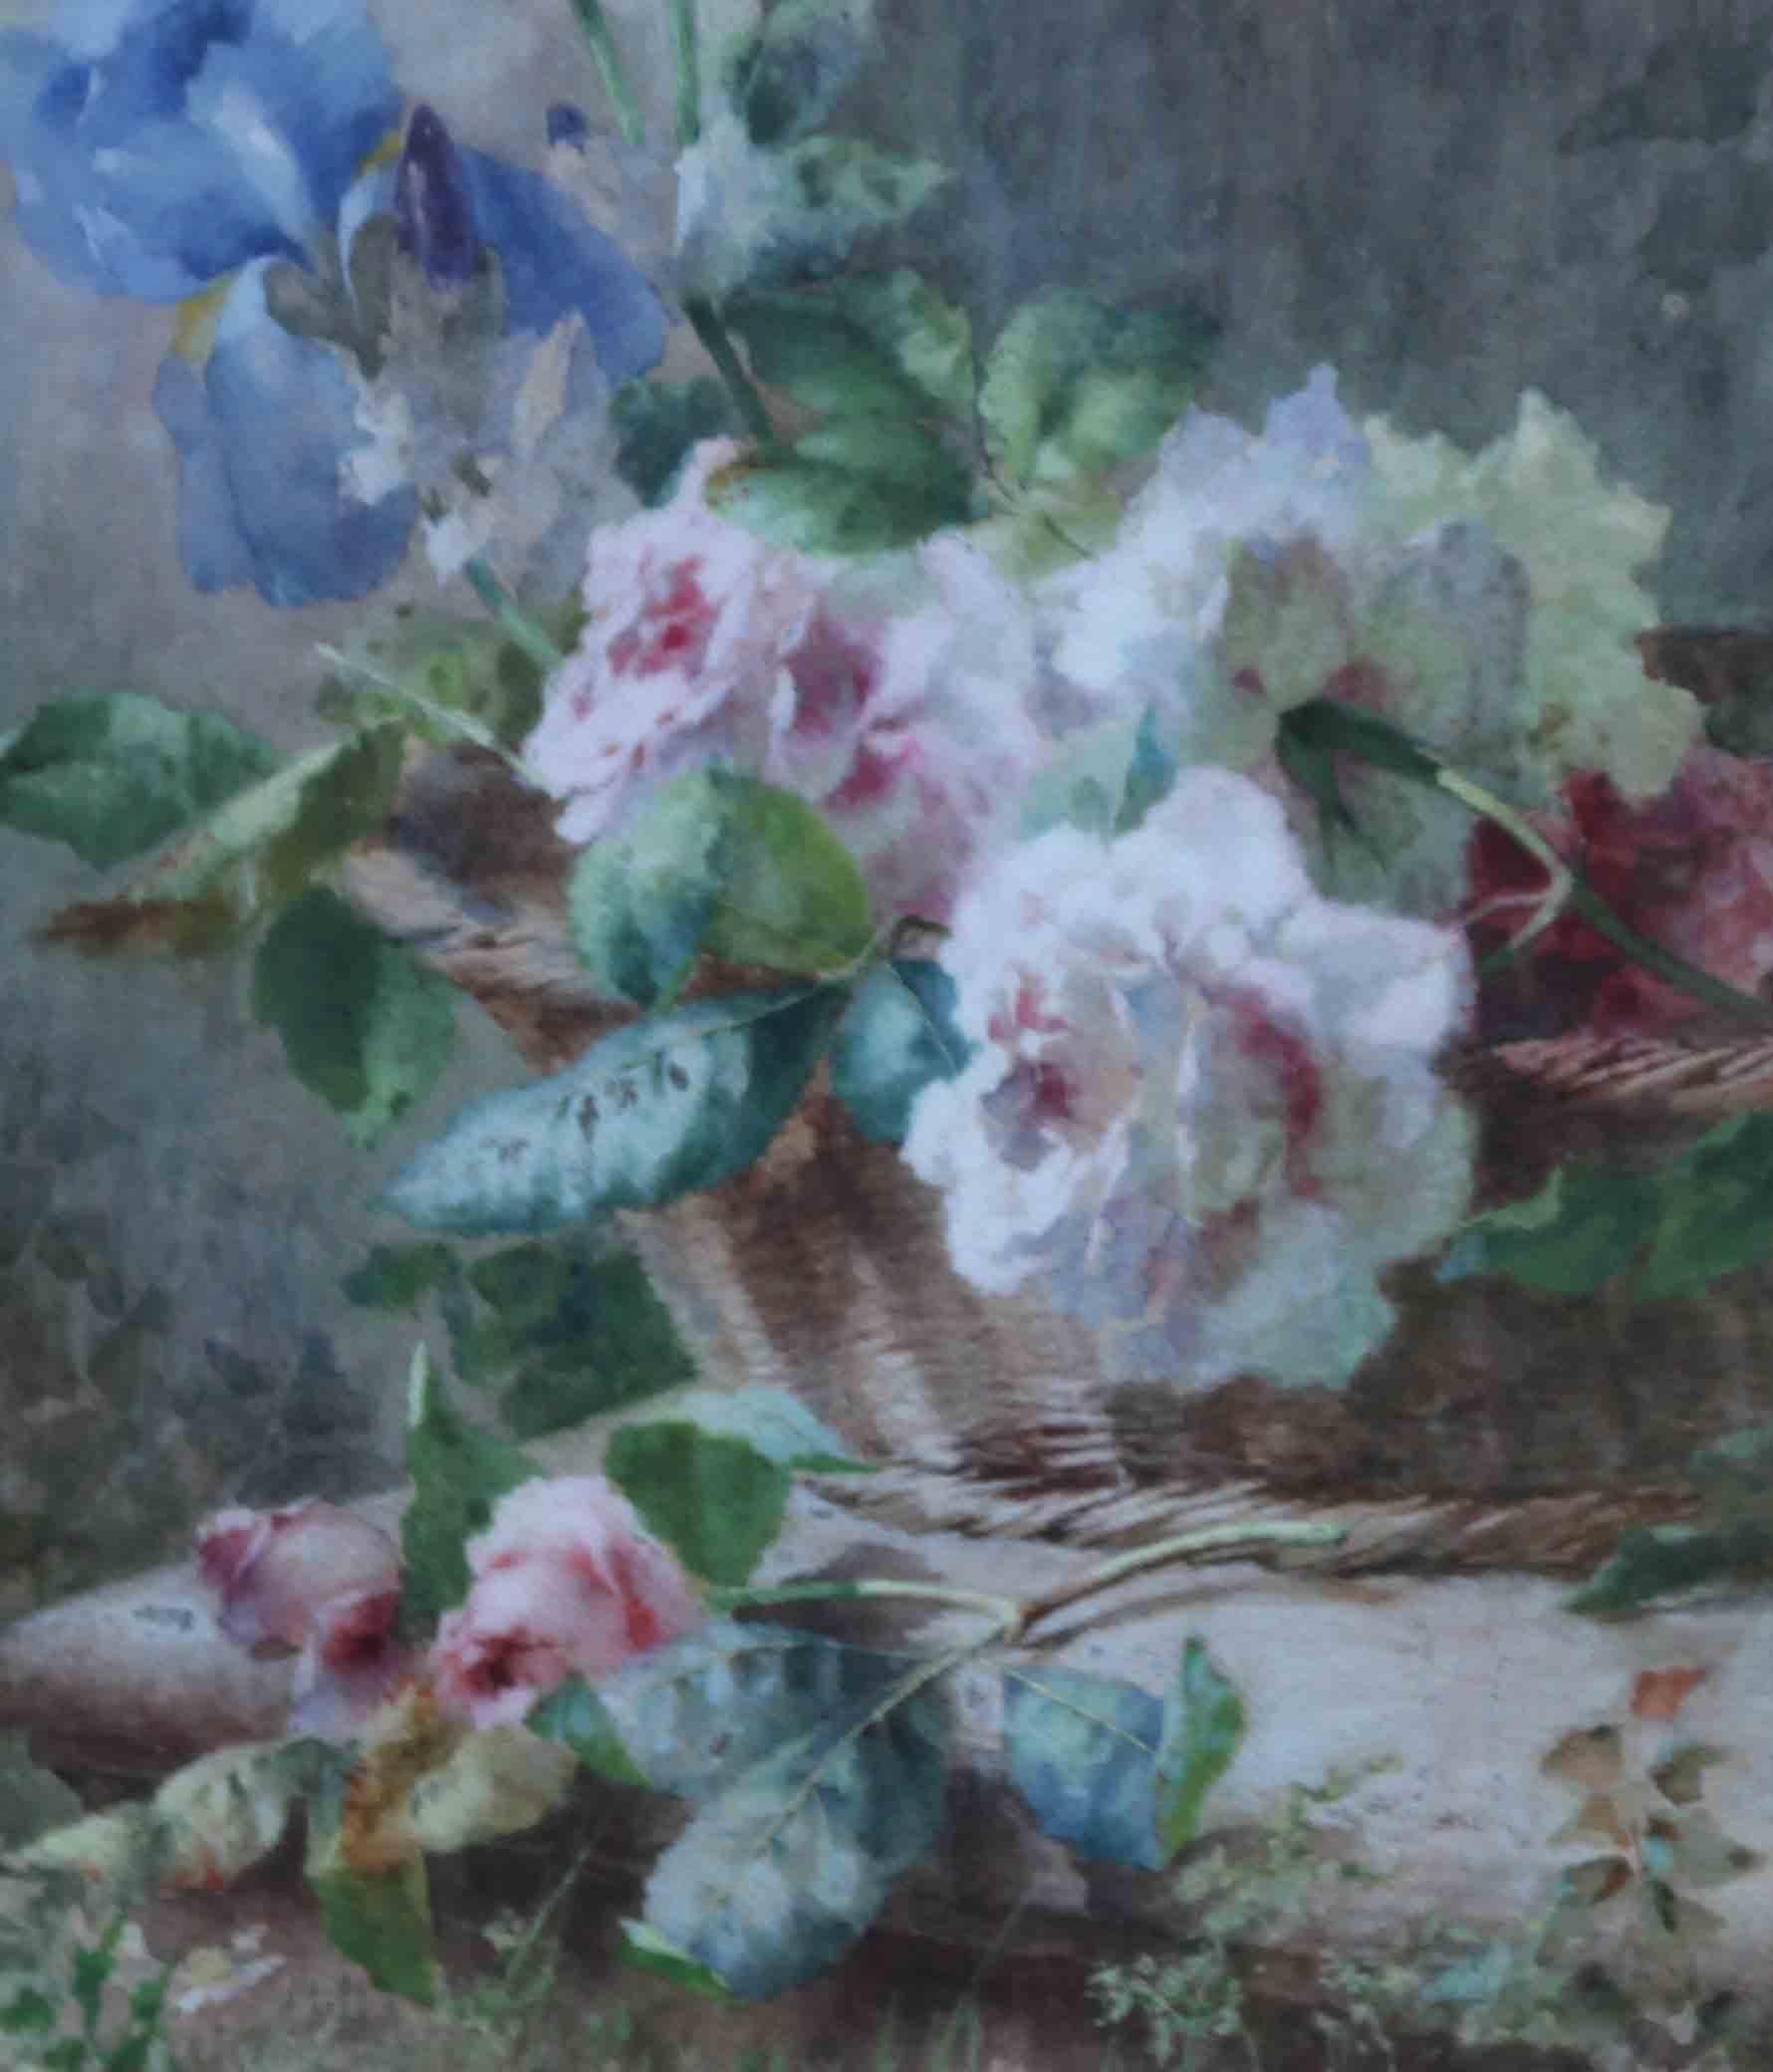 Irises and Roses in Basket - Italian 19th Century art floral still life painting - Impressionist Art by Ermocrate Bucchi